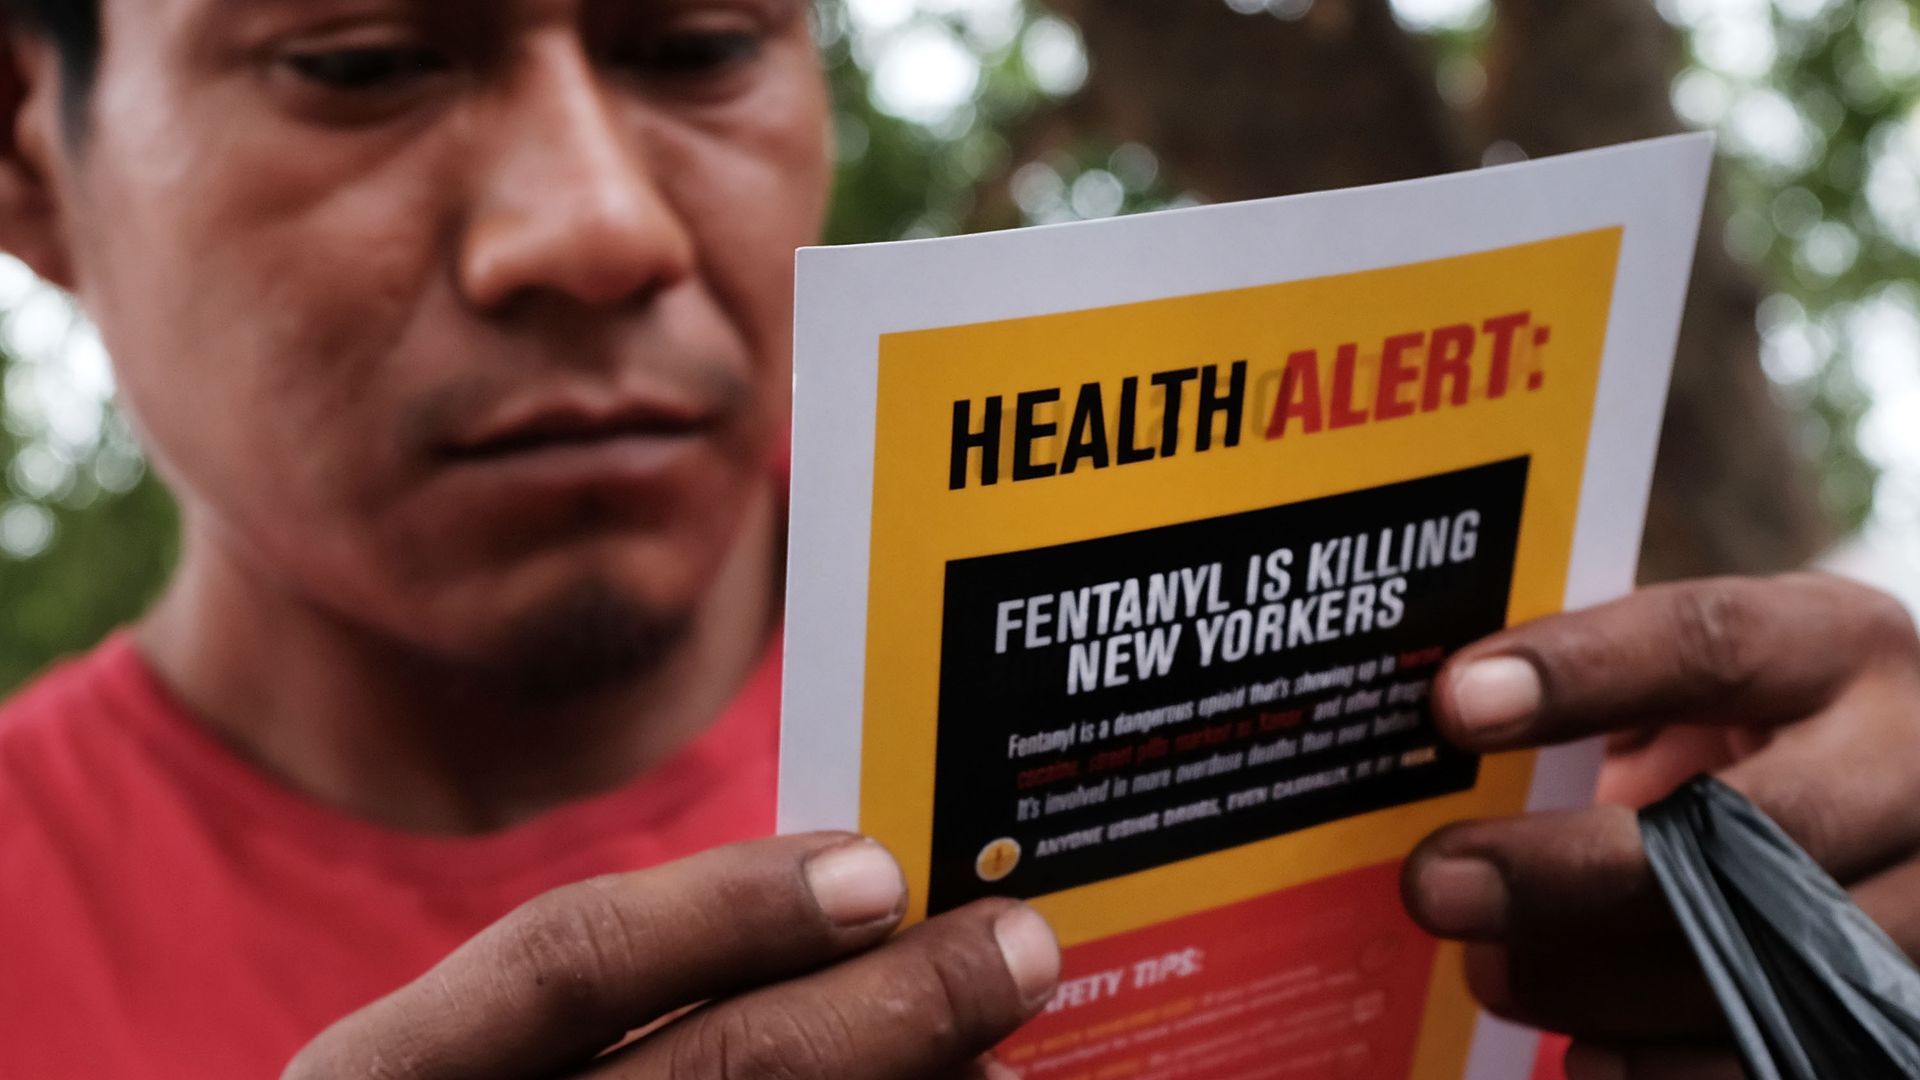 In this image, a man holds up a poster that reads "Health Alert: Fentanyl is killing New Yorkers"